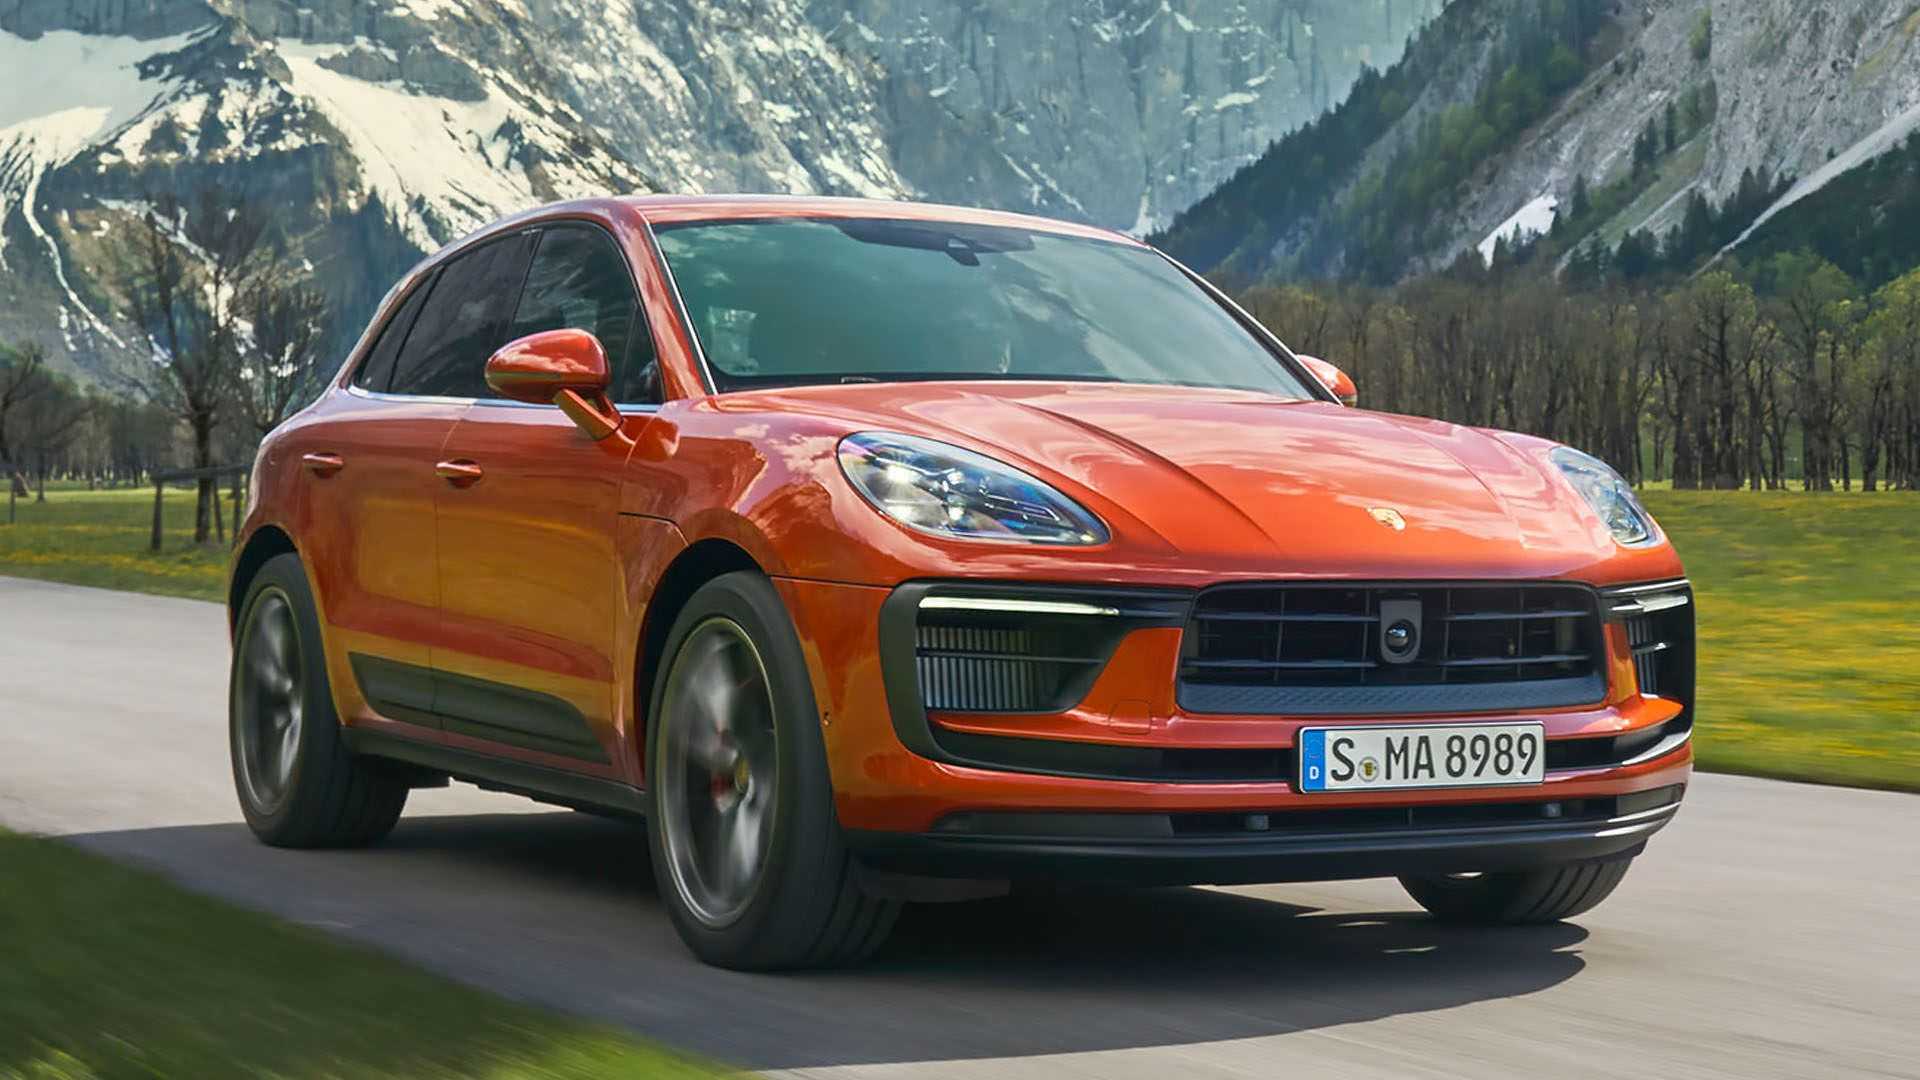 2022 Porsche Macan Debuts With More Power But Without ...